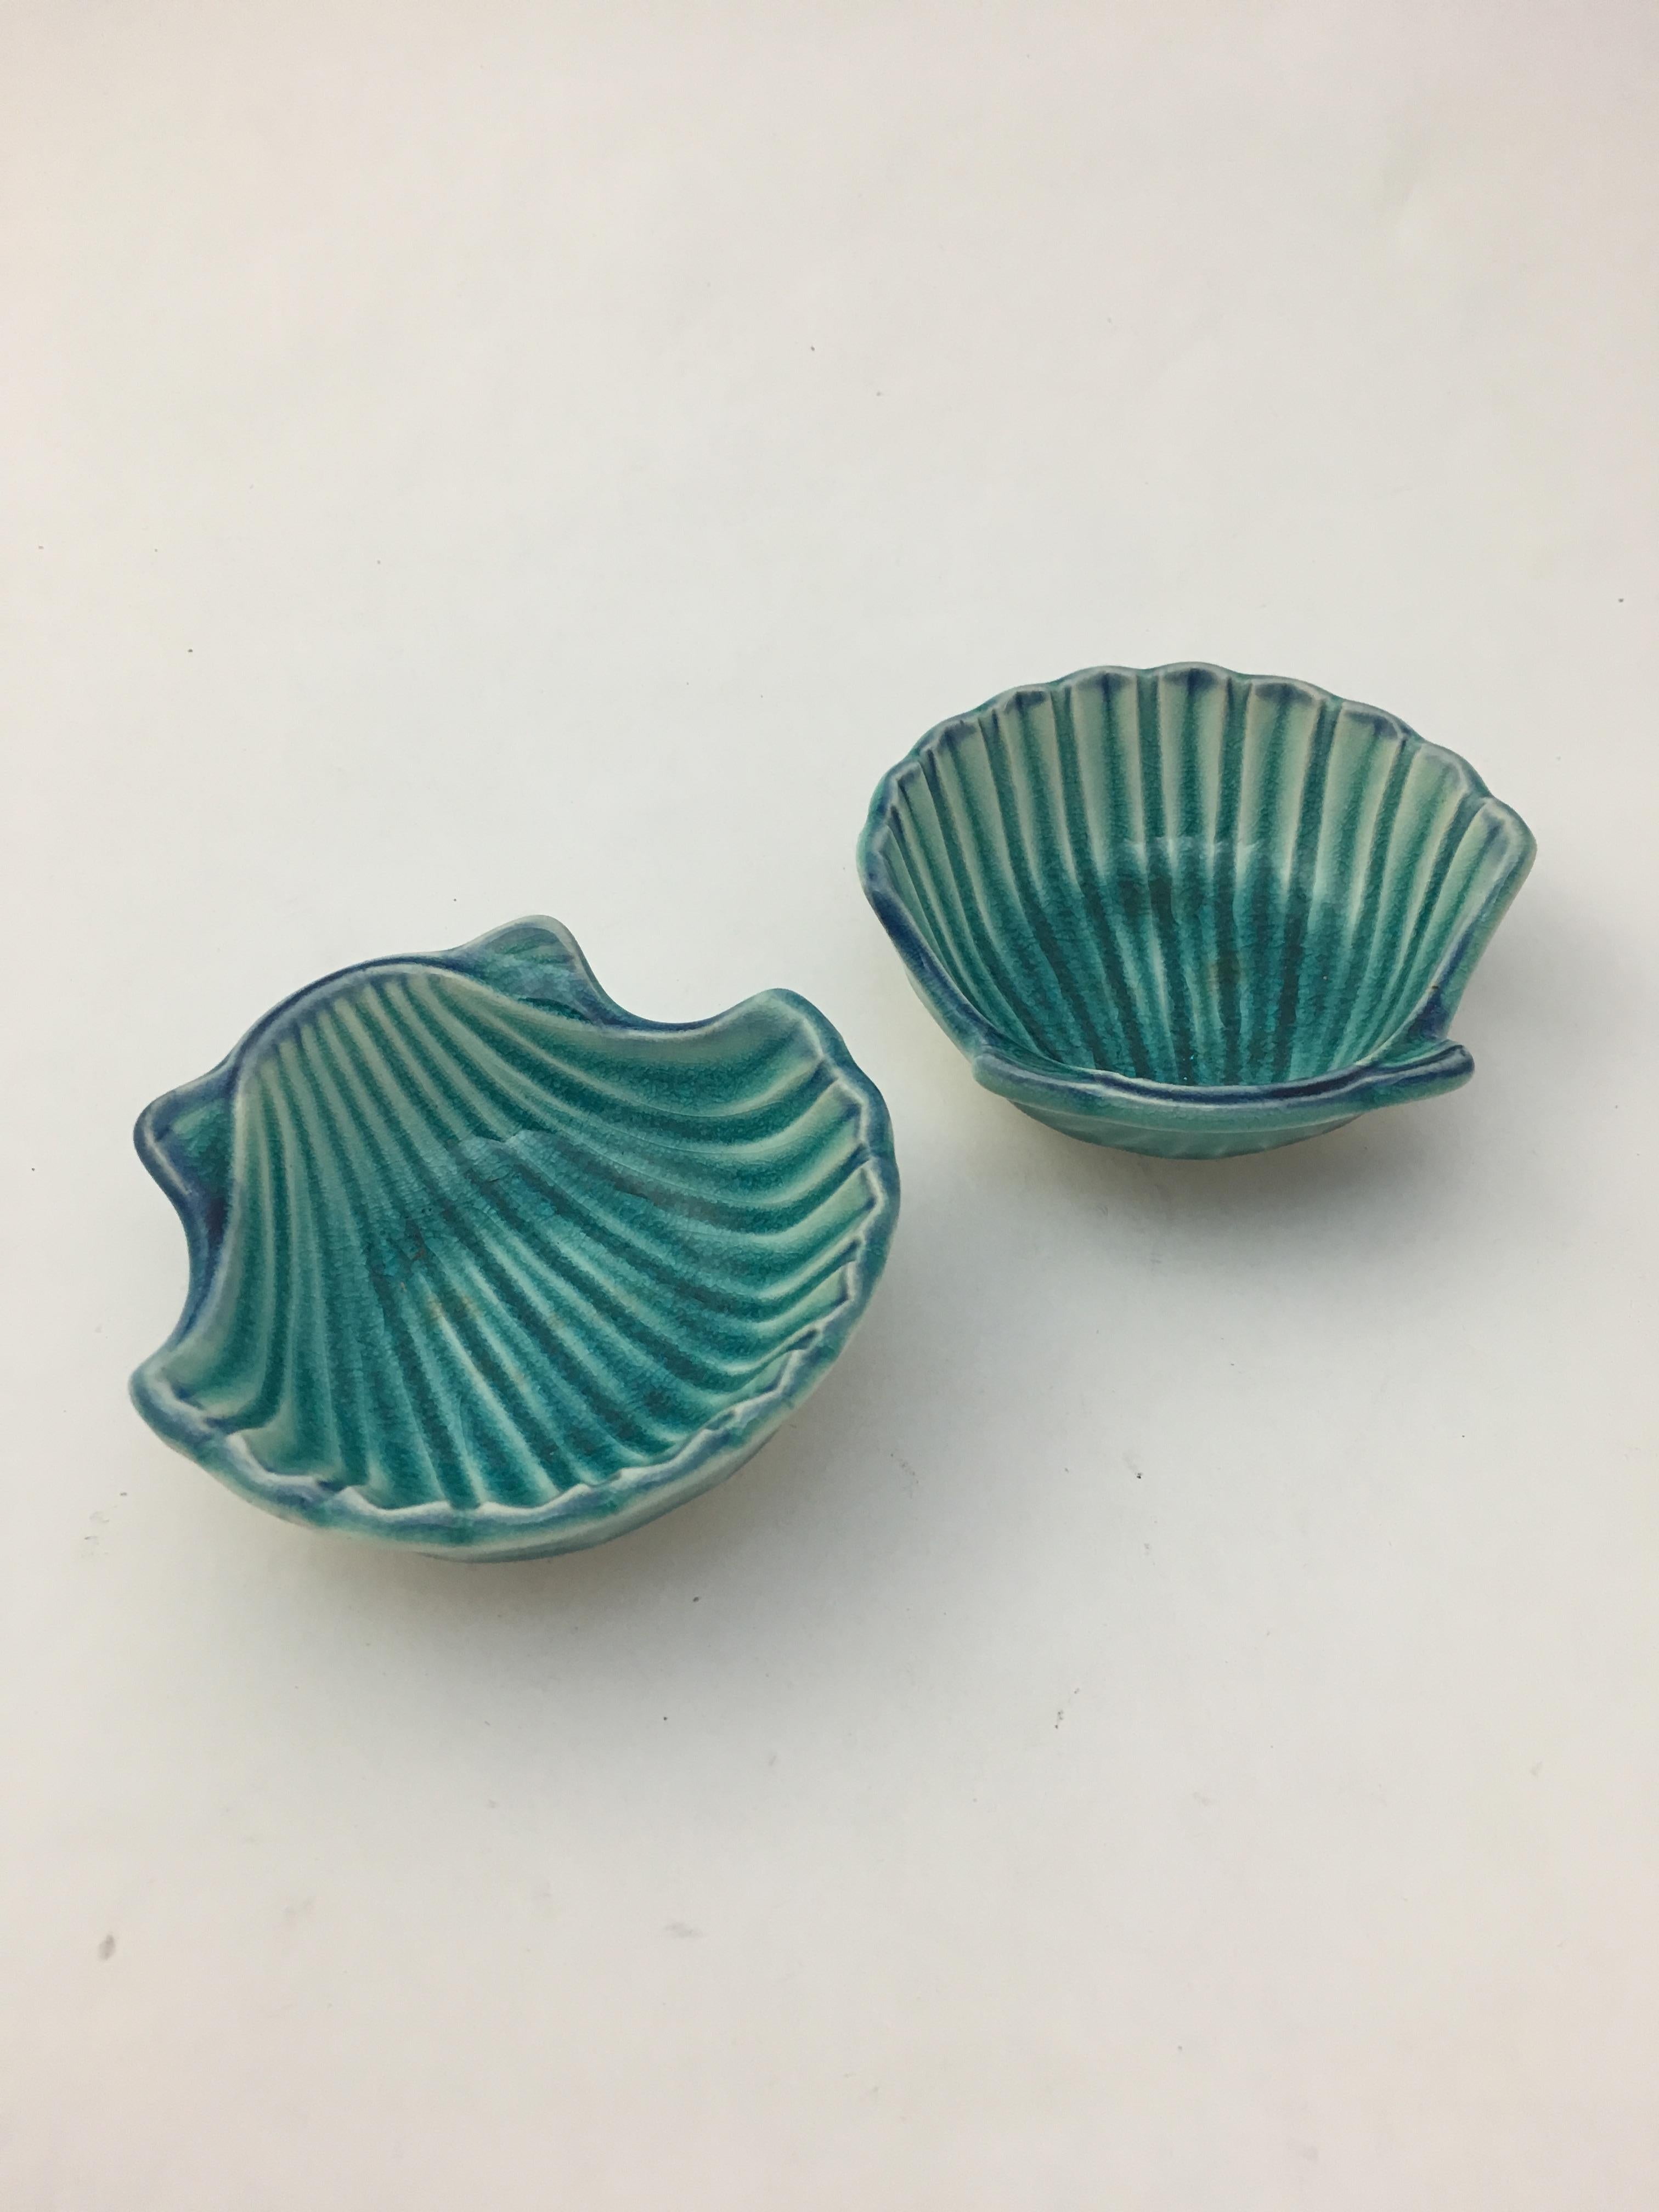 Beautifully glazed azure scallop shell nut bowls or ashtrays. Signed, made in Japan and still retain their paper labels, circa 1960. Very good condition with no chips, cracks or hairlines.